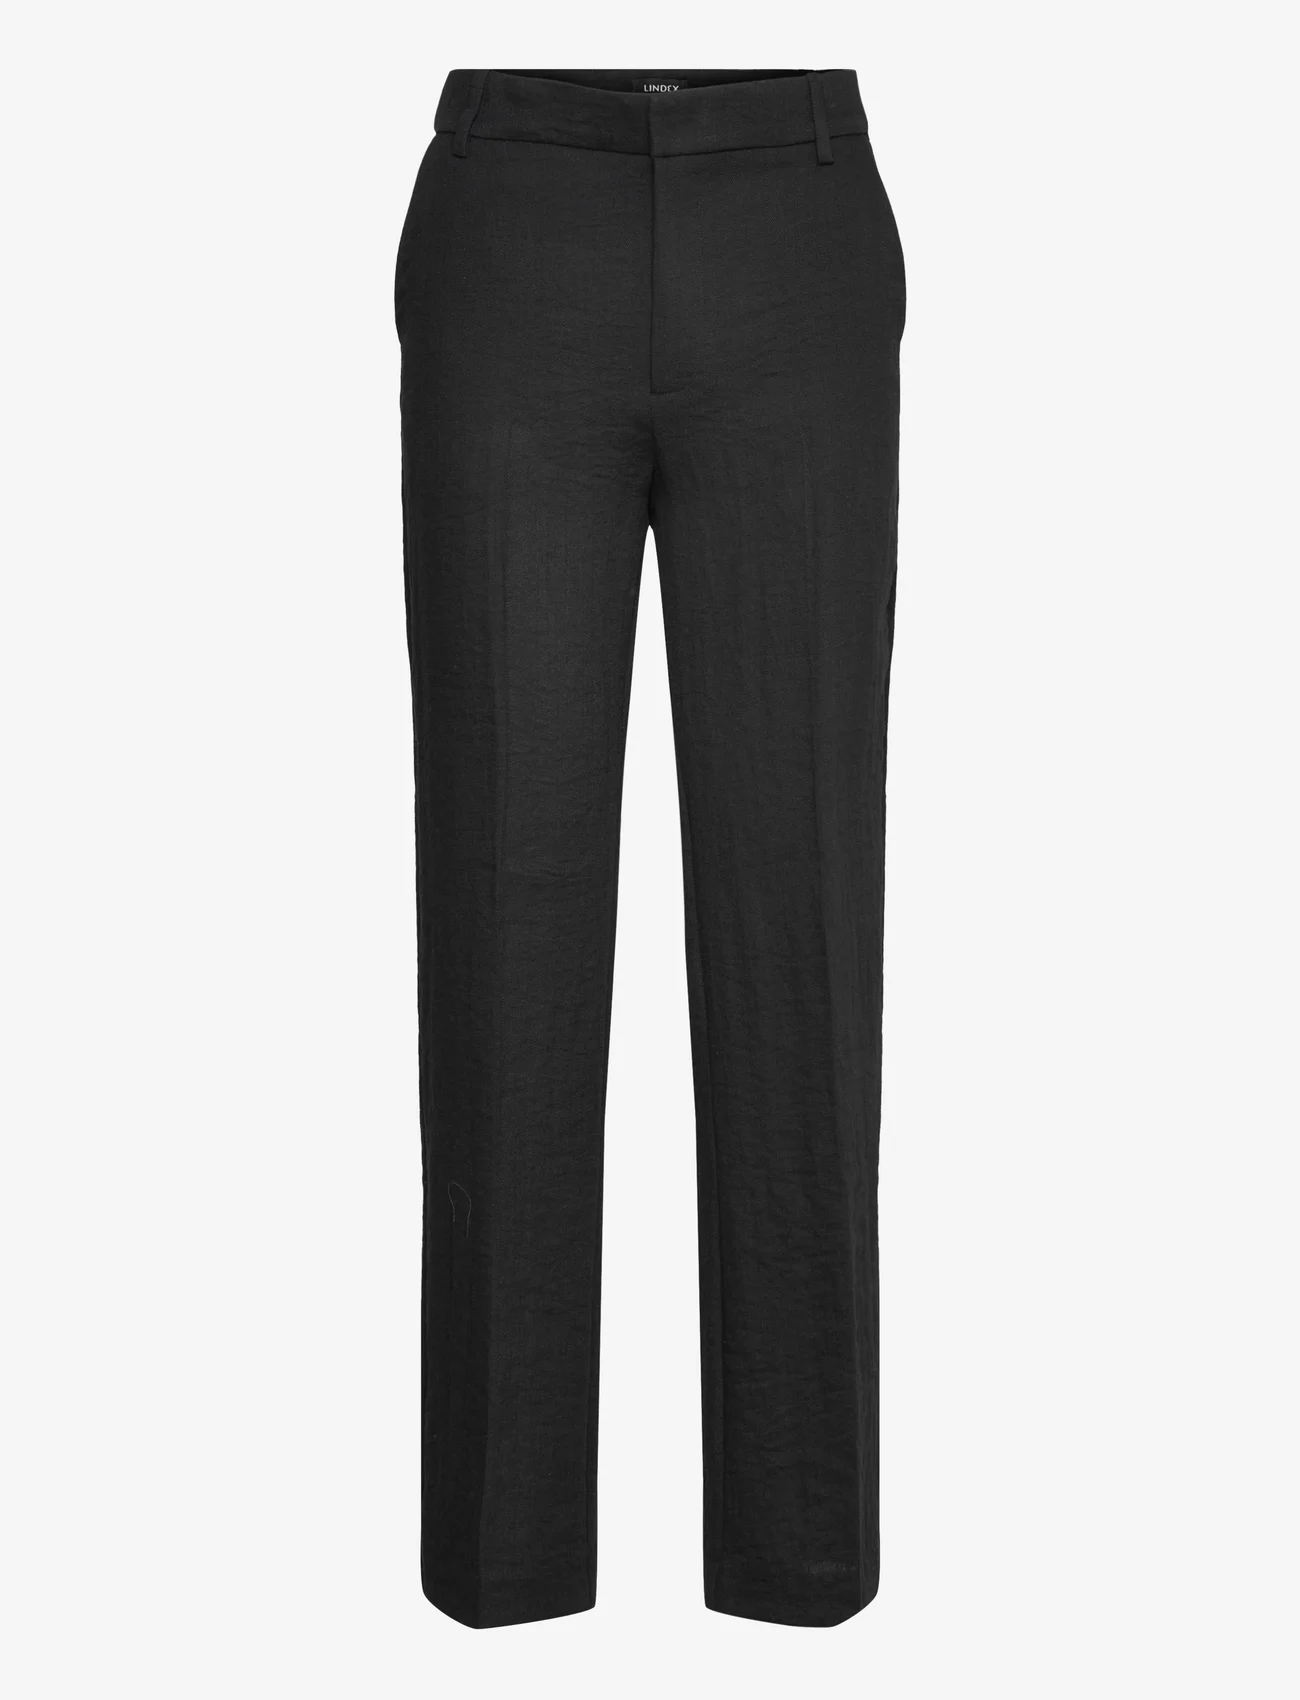 Lindex - Trousers Noor spring - straight leg trousers - black - 0